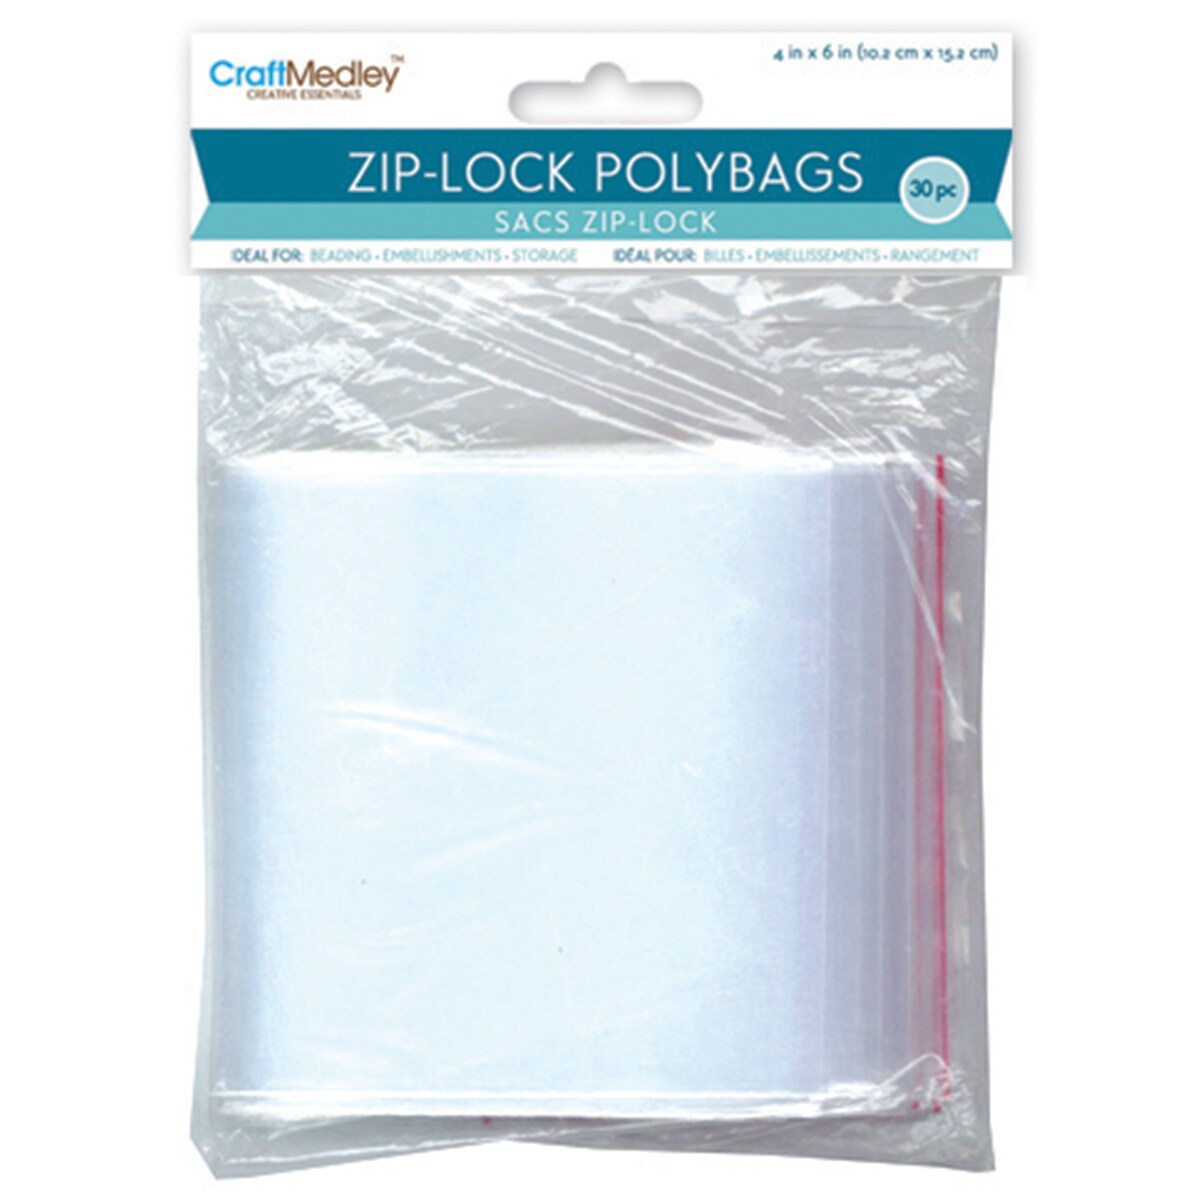 Bizroma Combo Vacuum Storage Bags for Clothes, Travel, Moving (10-Pack)  SBCB010 - The Home Depot